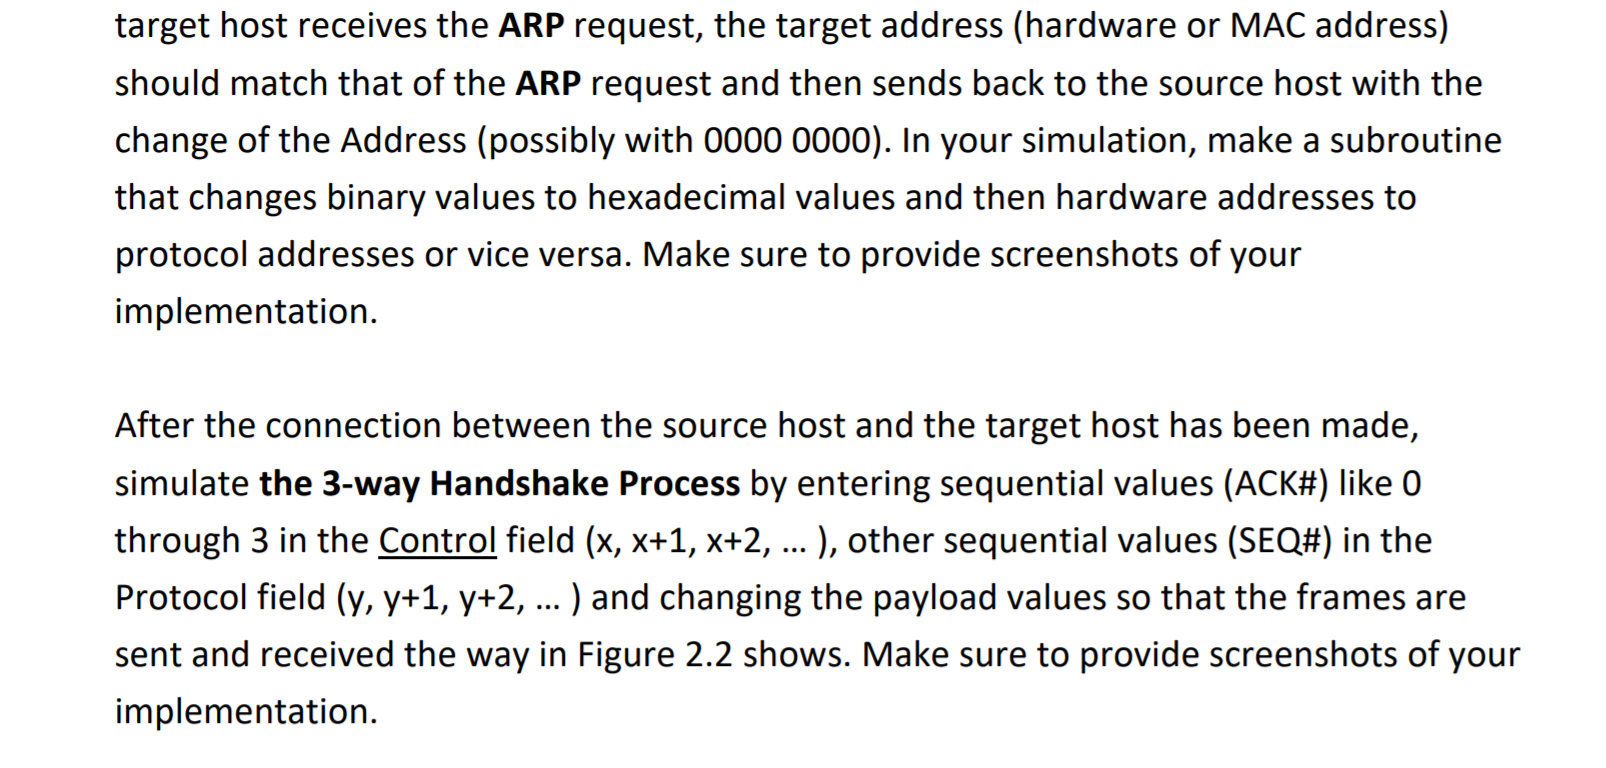 target host receives the ARP request, the target address (hardware or MAC address) should match that of the ARP request and t